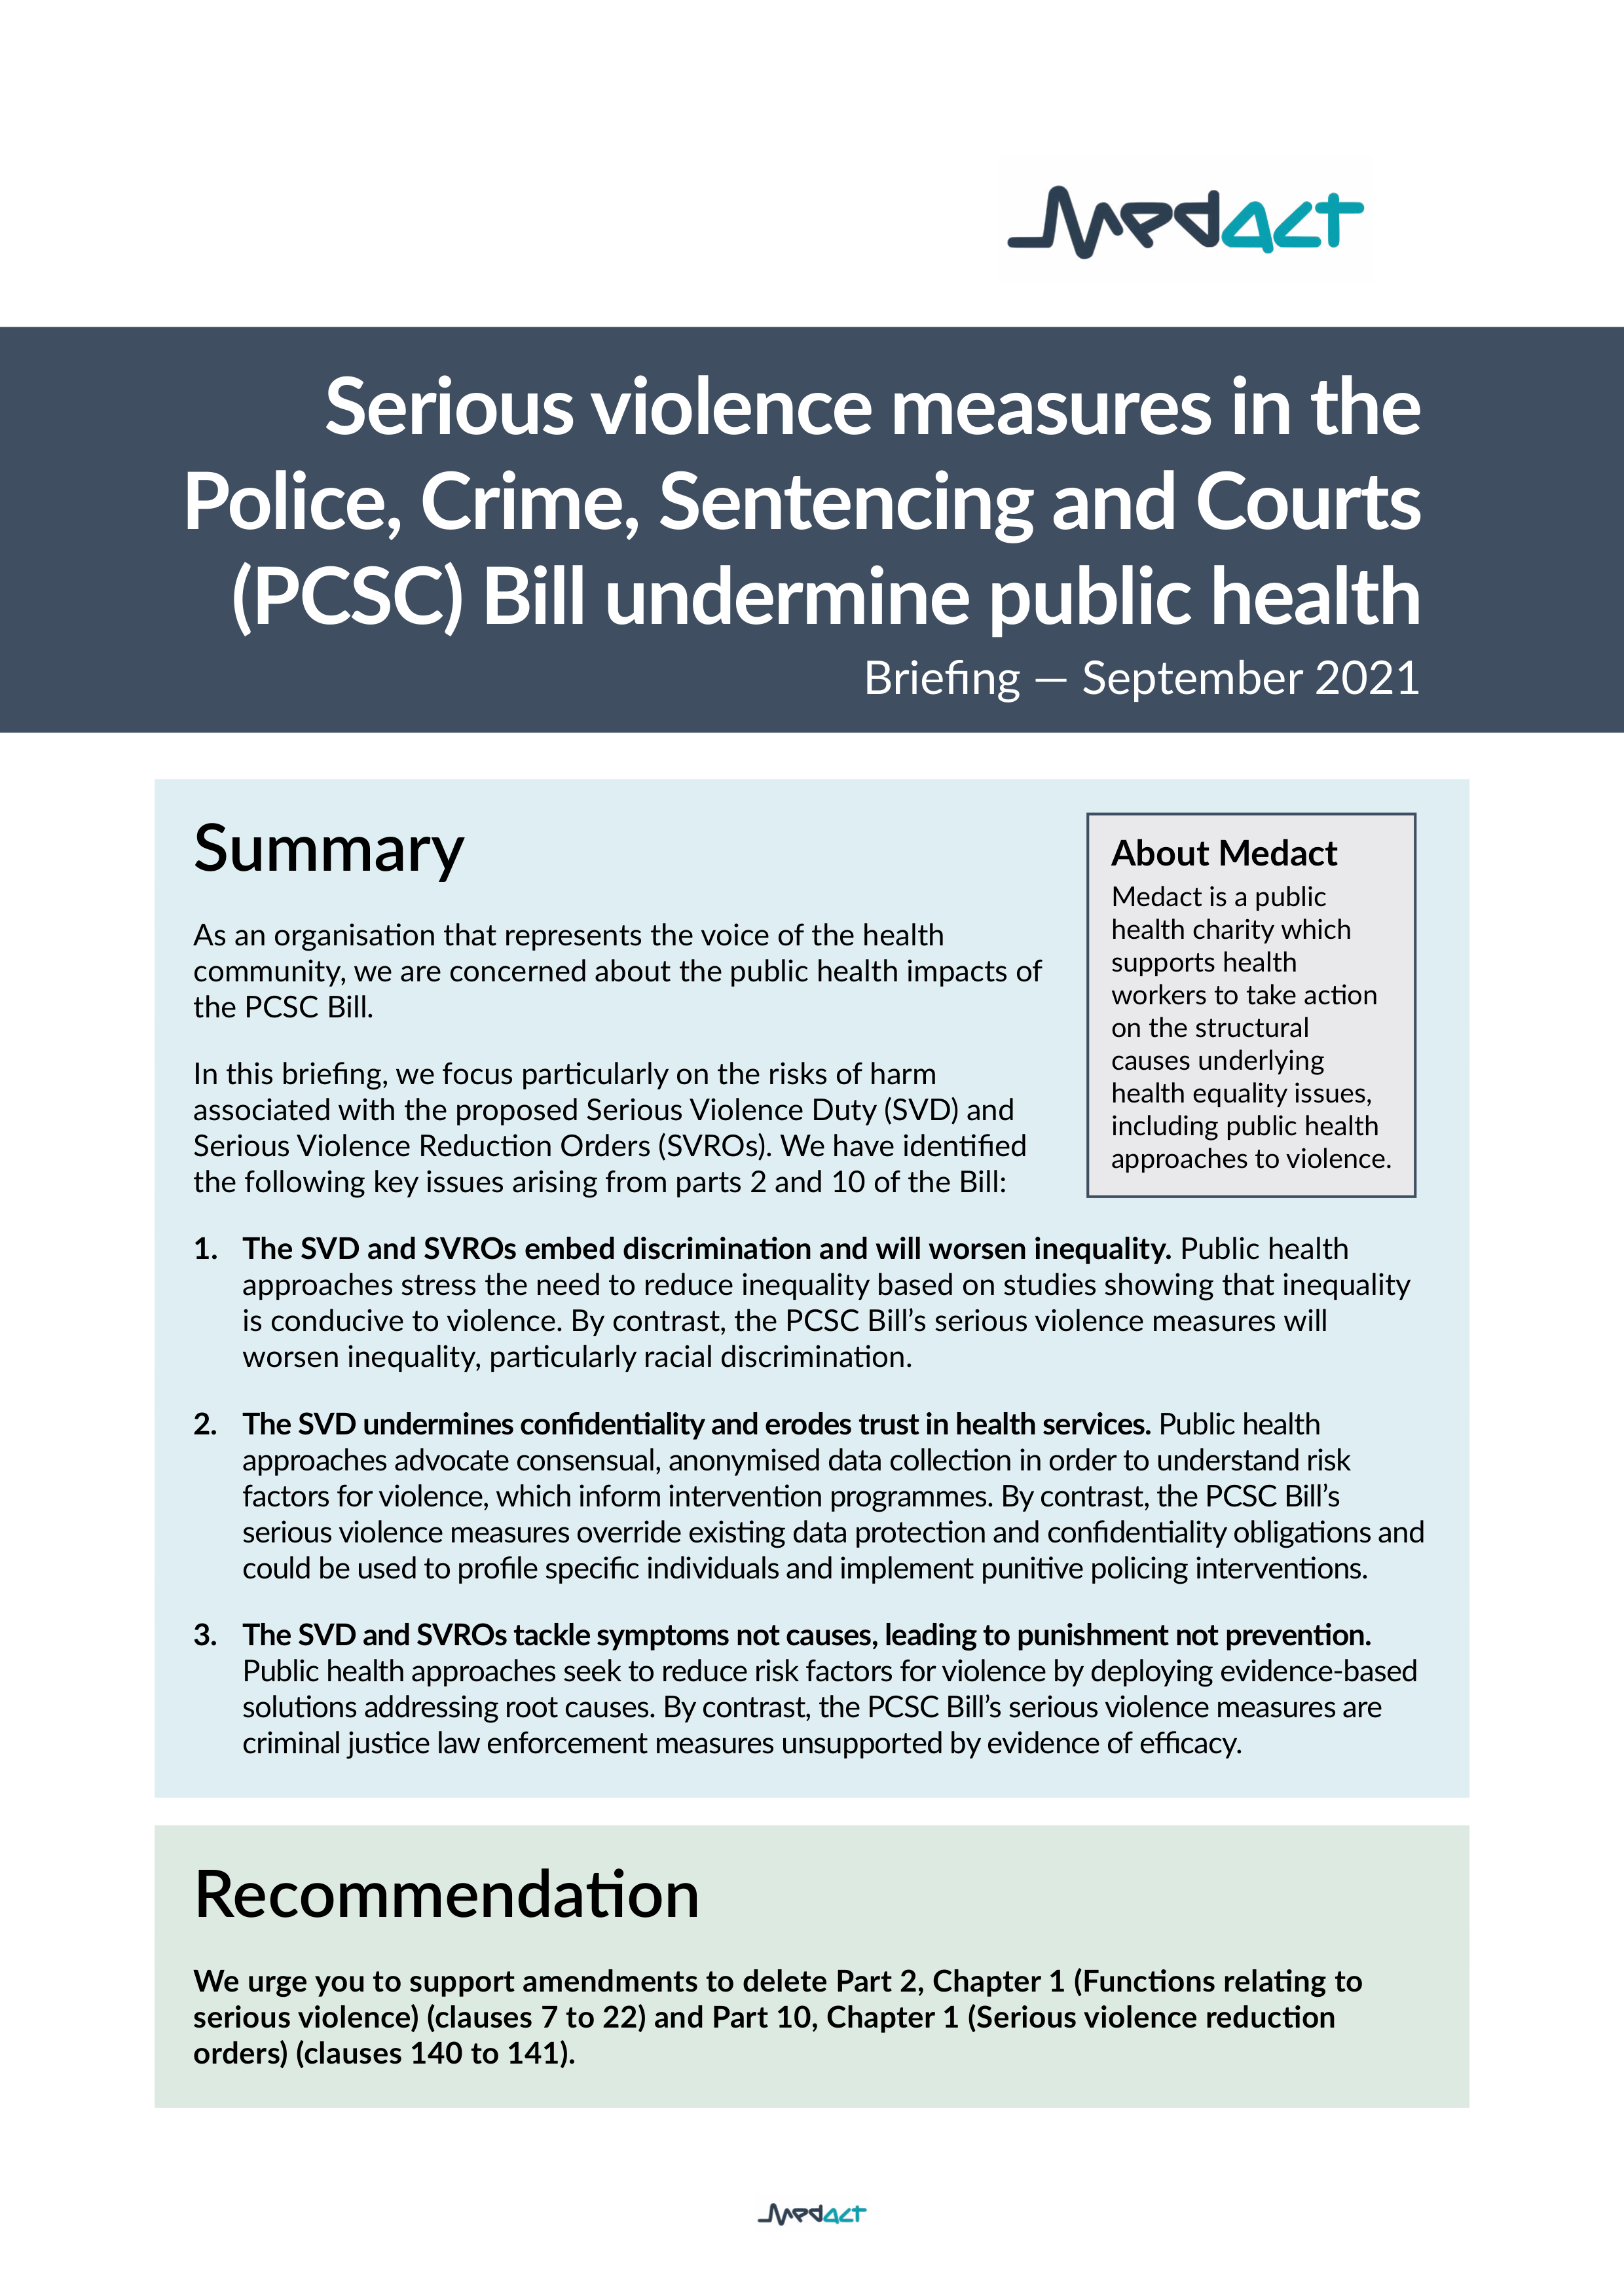 Serious violence measures in the Police, Crime, Sentencing and Courts (PCSC) Bill undermine public health